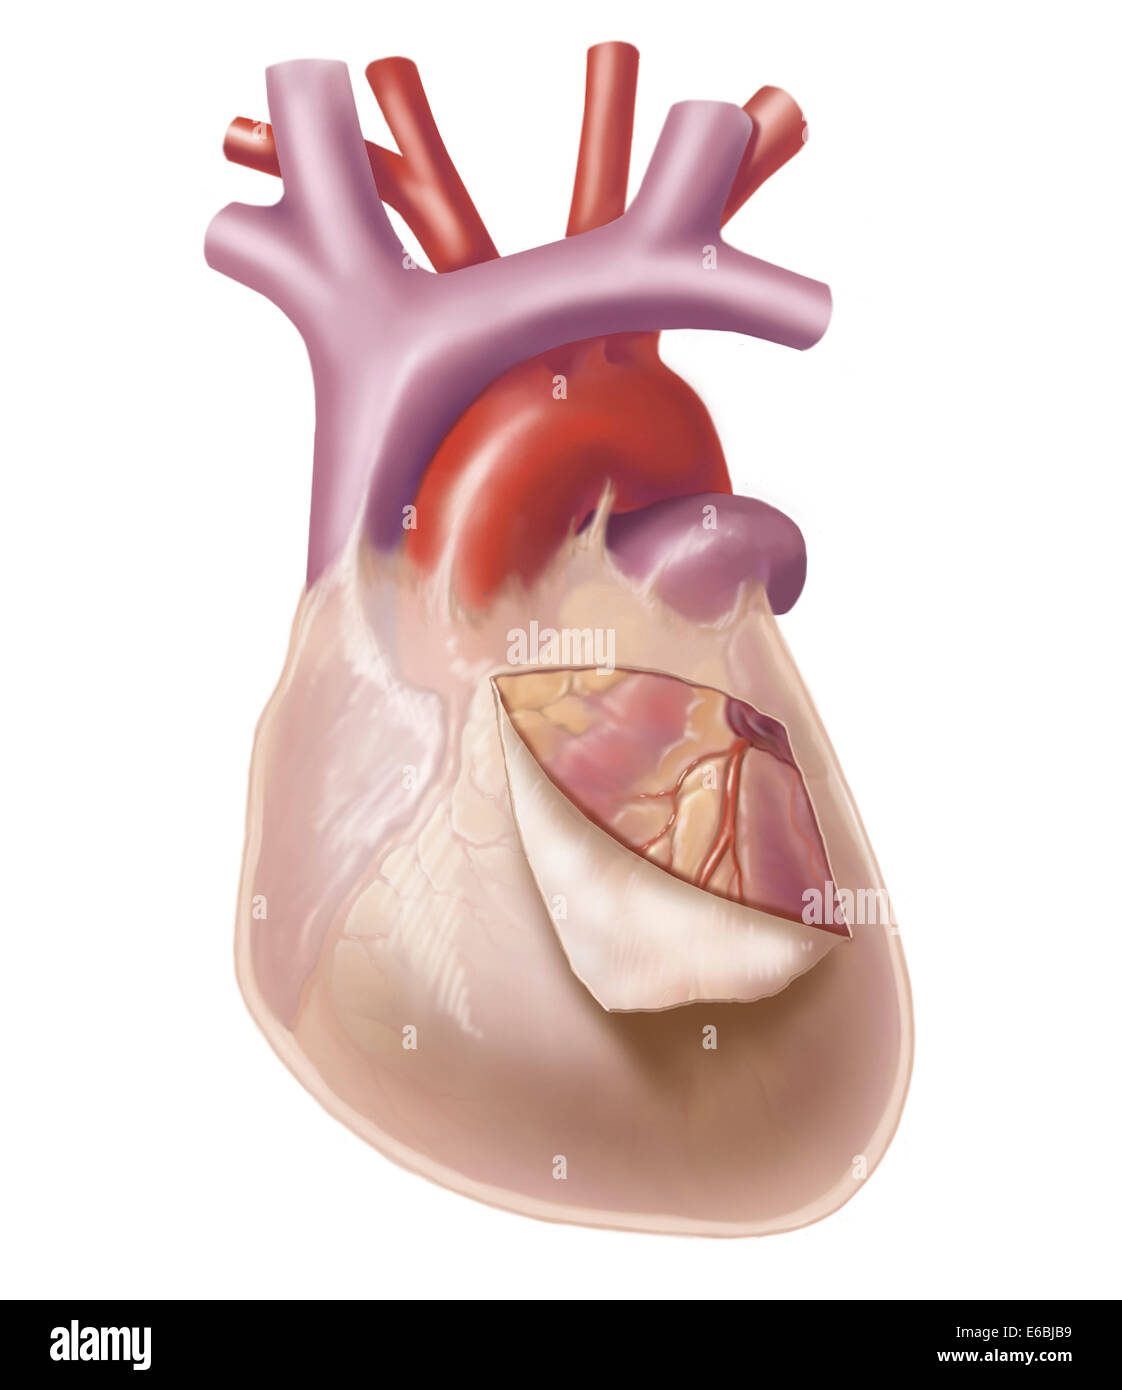 Heart with pericadium pulled back exposing heart muscle. Stock Photo